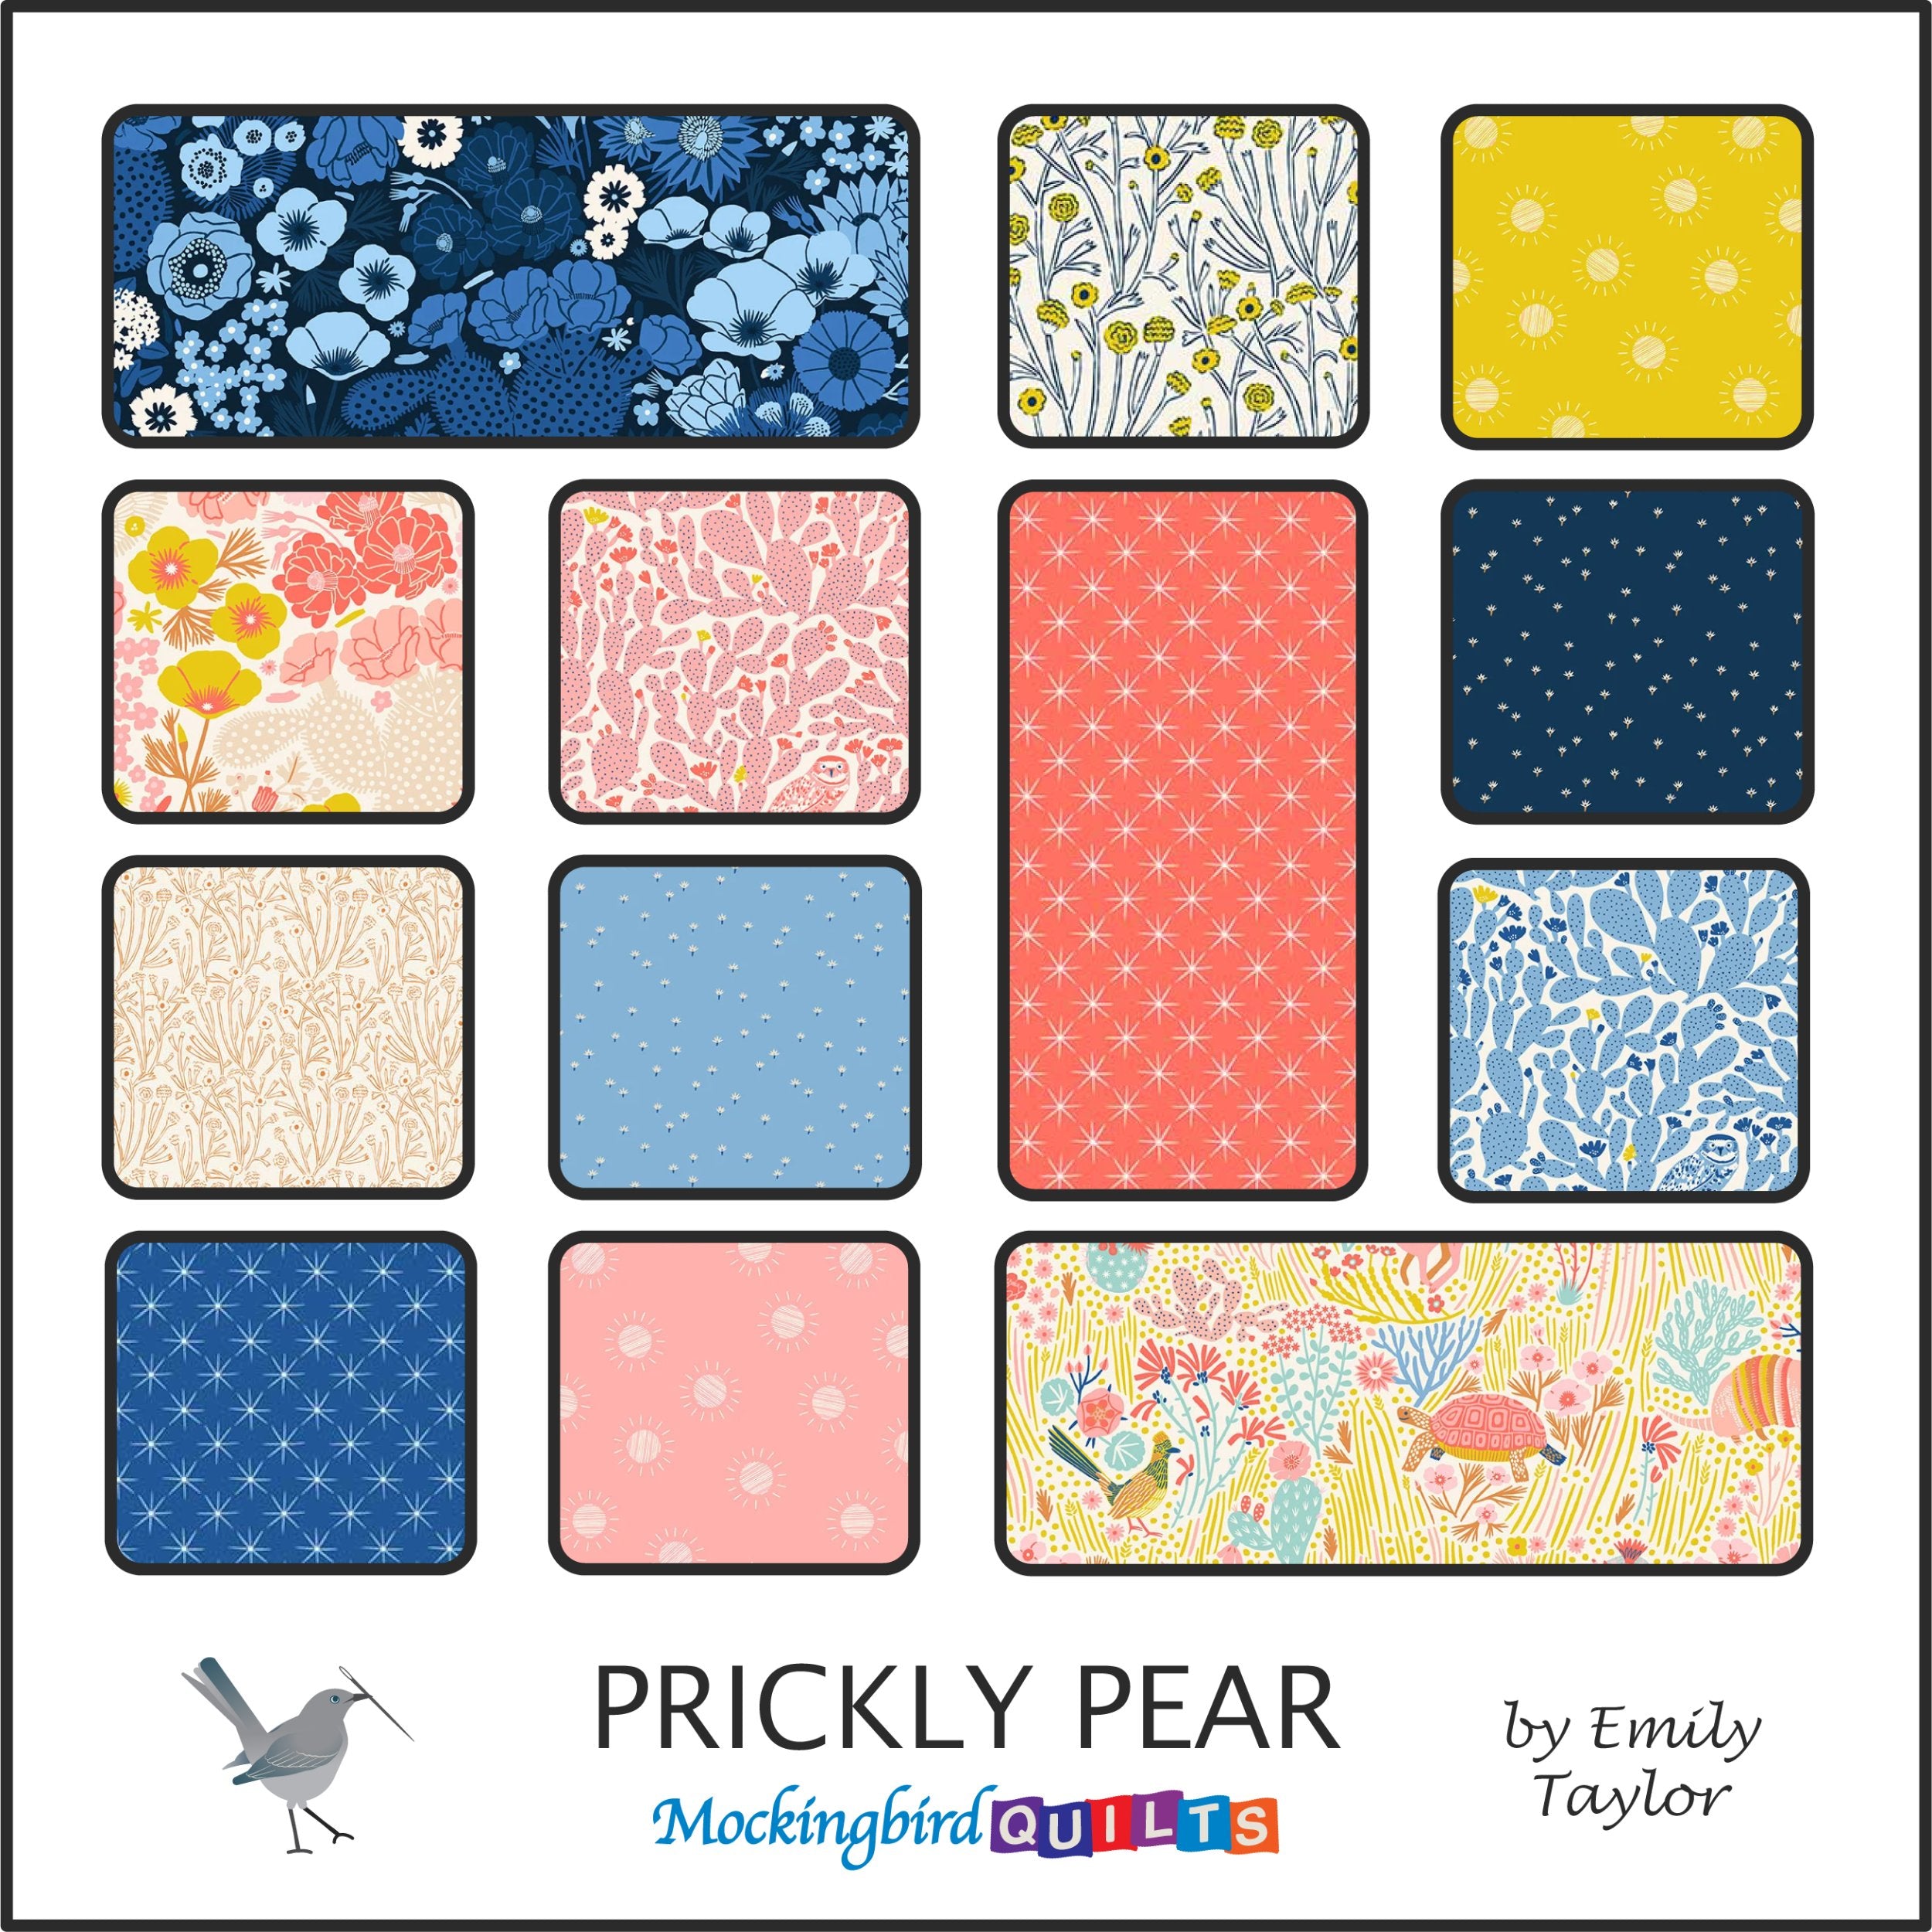 This image shows fourteen fabric swatches in the collection “Prickly Pear” by Emily Taylor. This fabric line was inspired by the beauty of the desert, with patterns of sharp florals and sunny cacti.